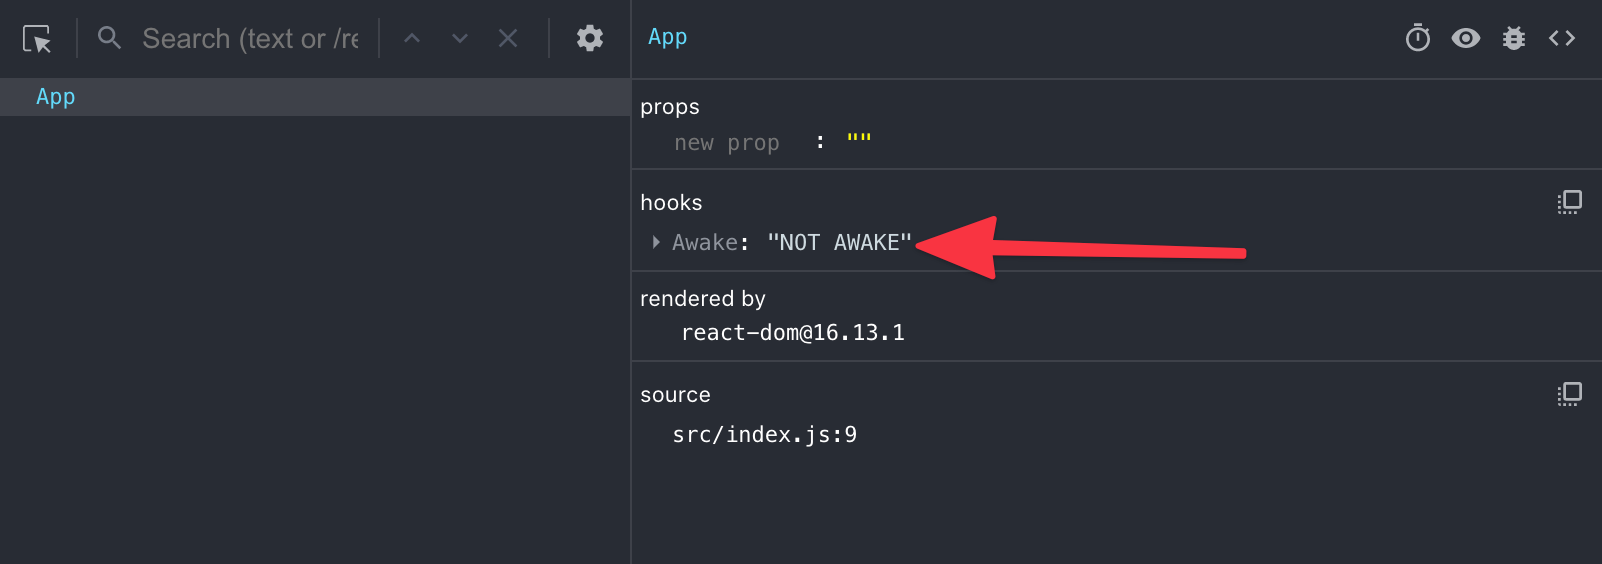 React Hooks Documentation: An Easy to Read Version